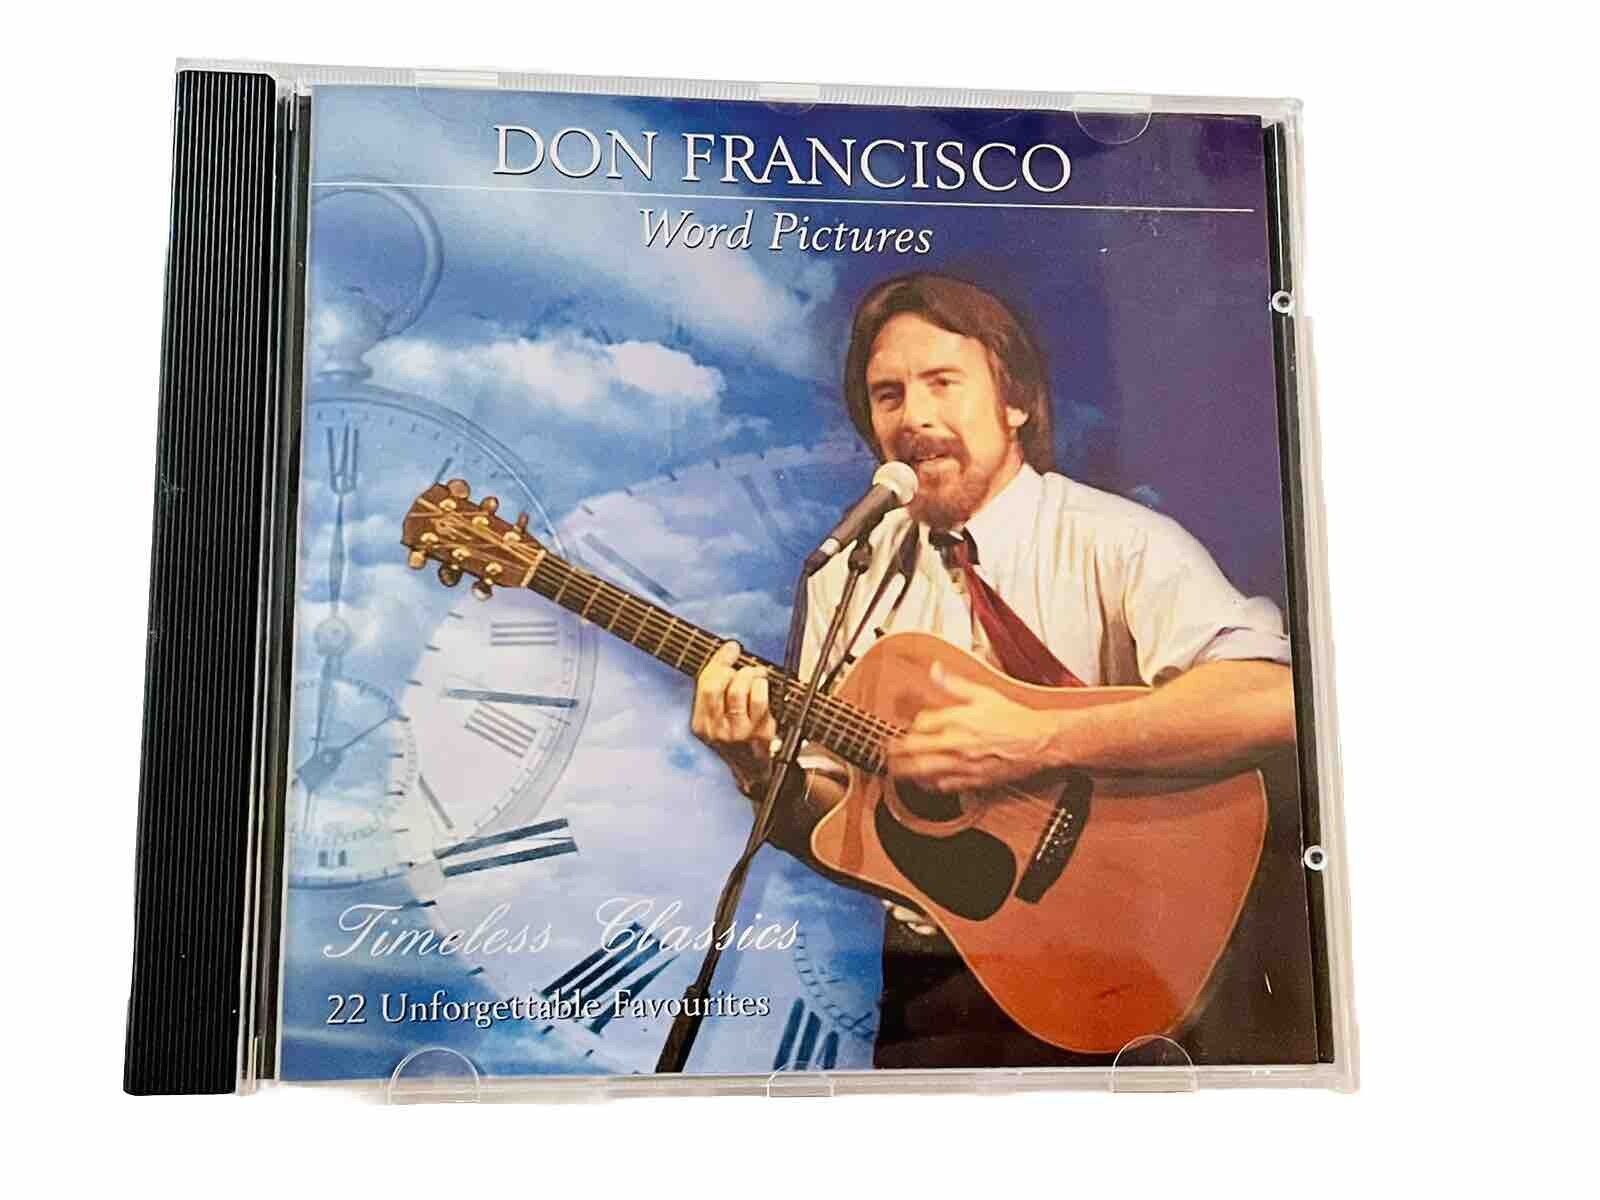 DON FRANCISCO word pictures CD 1996 rare Christian songs cd